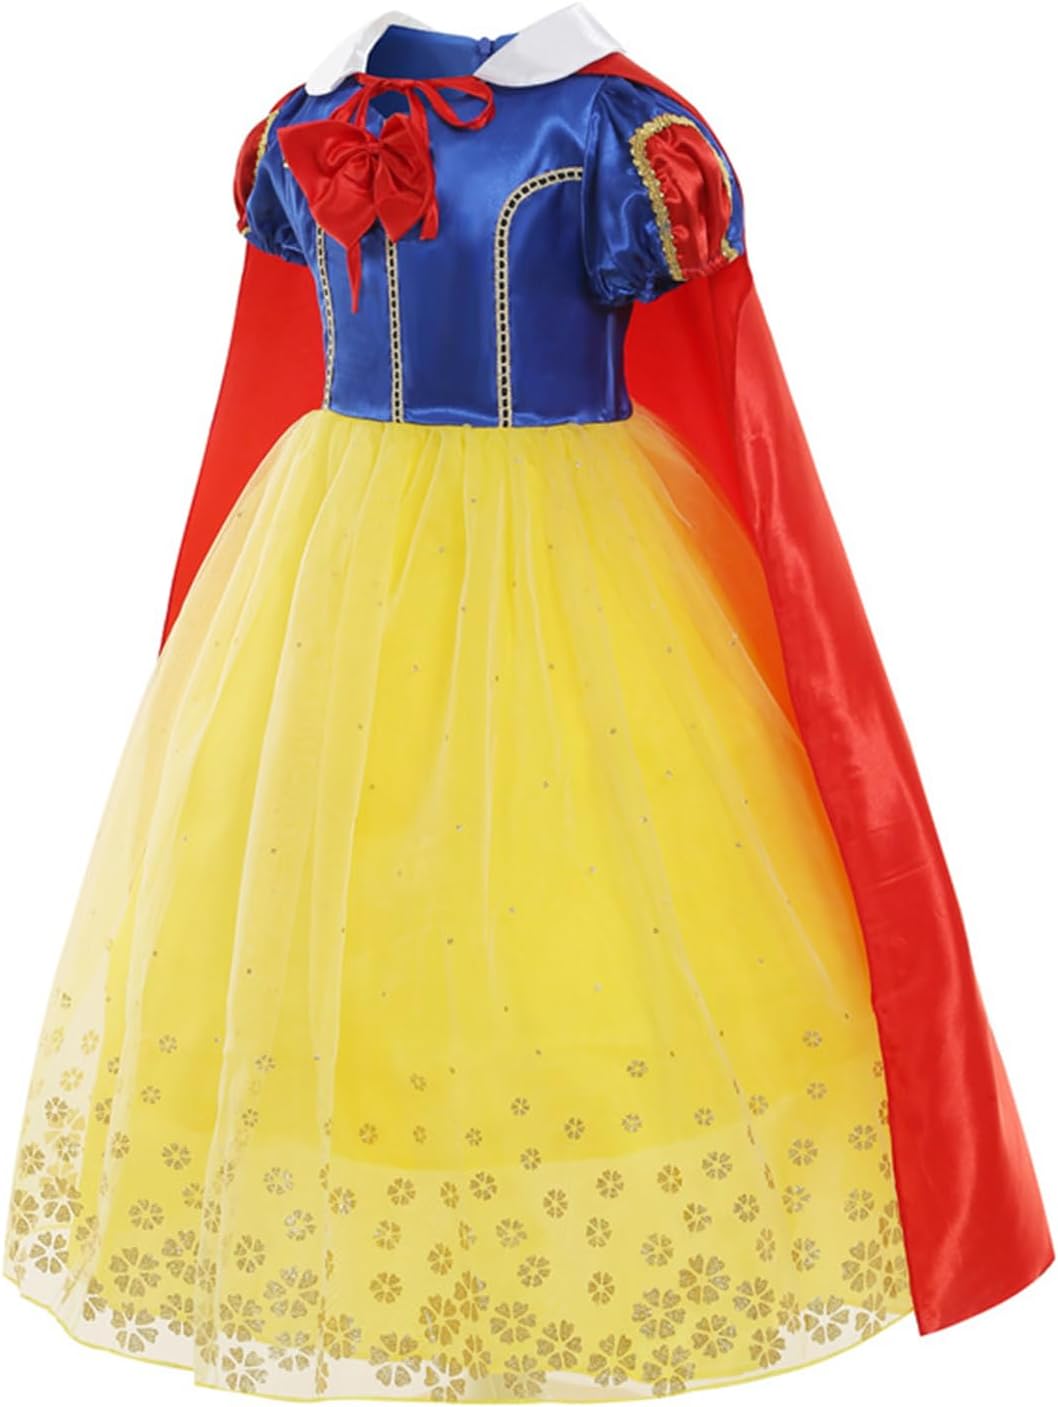 0TO1 Princess Dress, Princess Dress up Accessories, Kid Girls Snow White Dress Princess, for Kids Toddler Princess Dress Up Costume Outfits Cosplay Princess Party Tutu Dresses Kit (Size 51in)